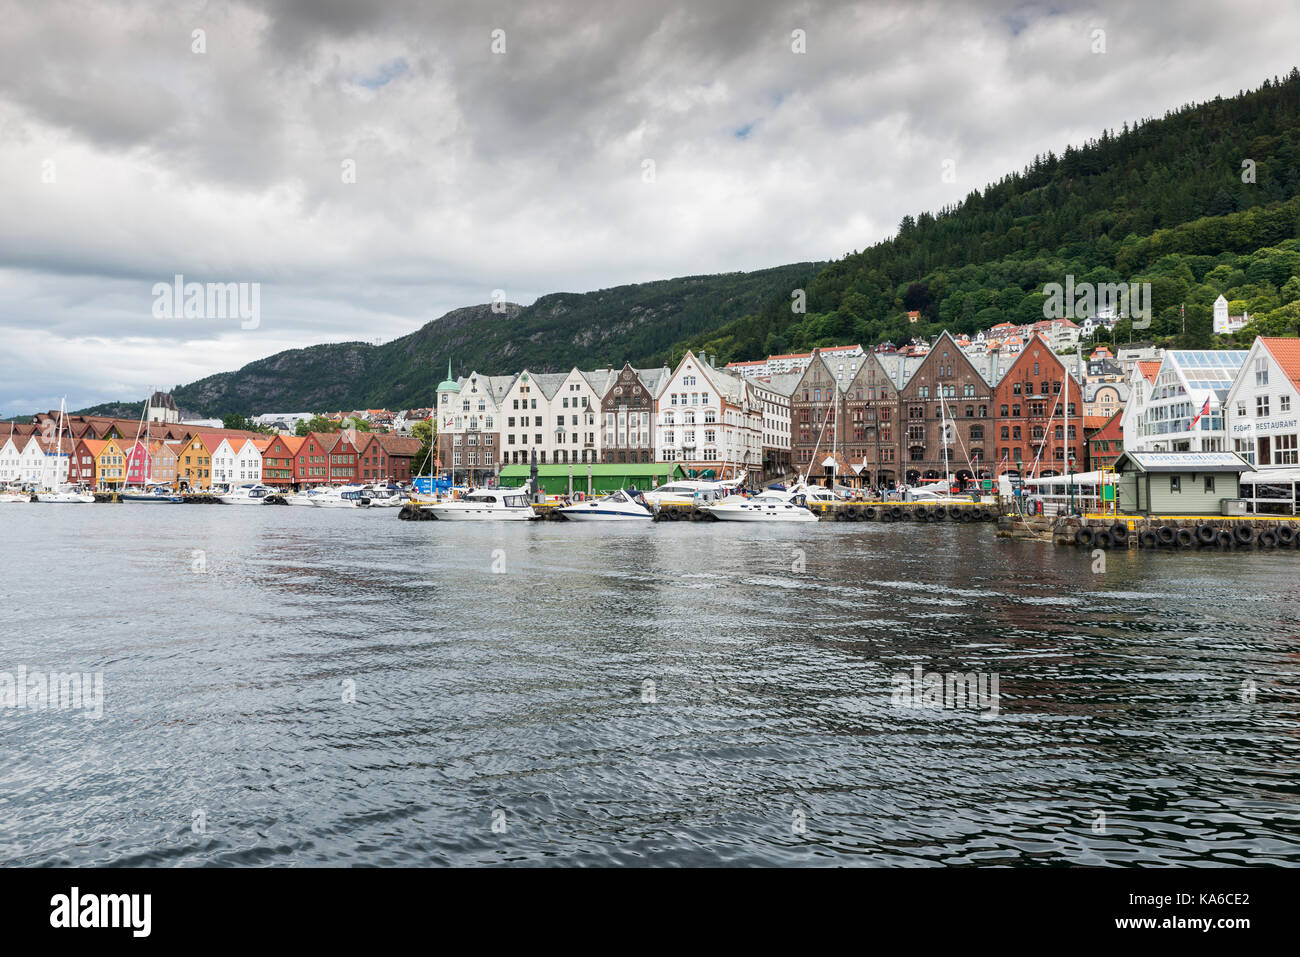 BERGEN,NORWAY,29-07-2017: the famous city of bergen with houses build upon the hills and tourists walking in the street for shopping and the fish mark Stock Photo